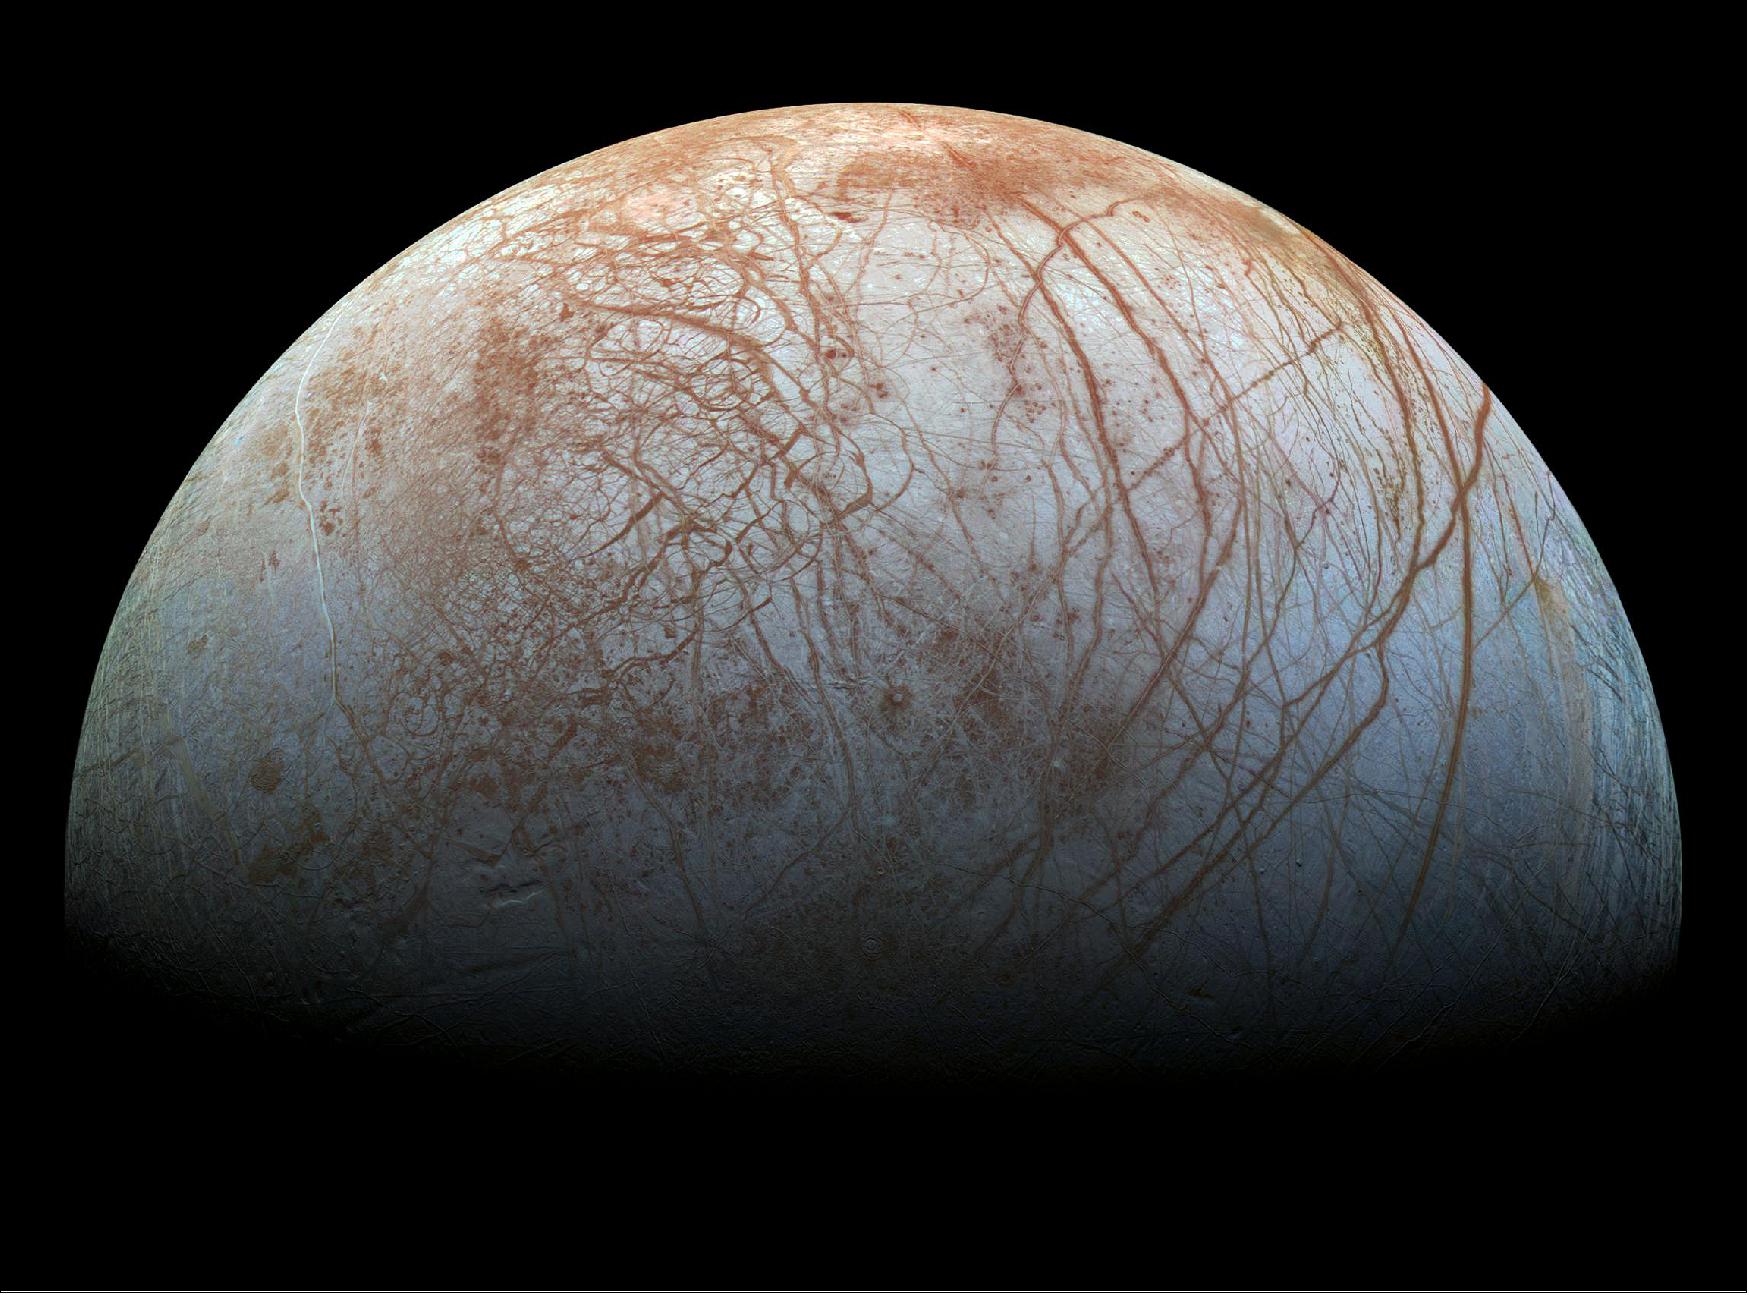 Figure 9: The surface geology of Jupiter's icy moon Europa is on display in this view made from images taken by NASA's Galileo spacecraft in the late 1990s (image credit: NASA/JPL-Caltech/SETI Institute)